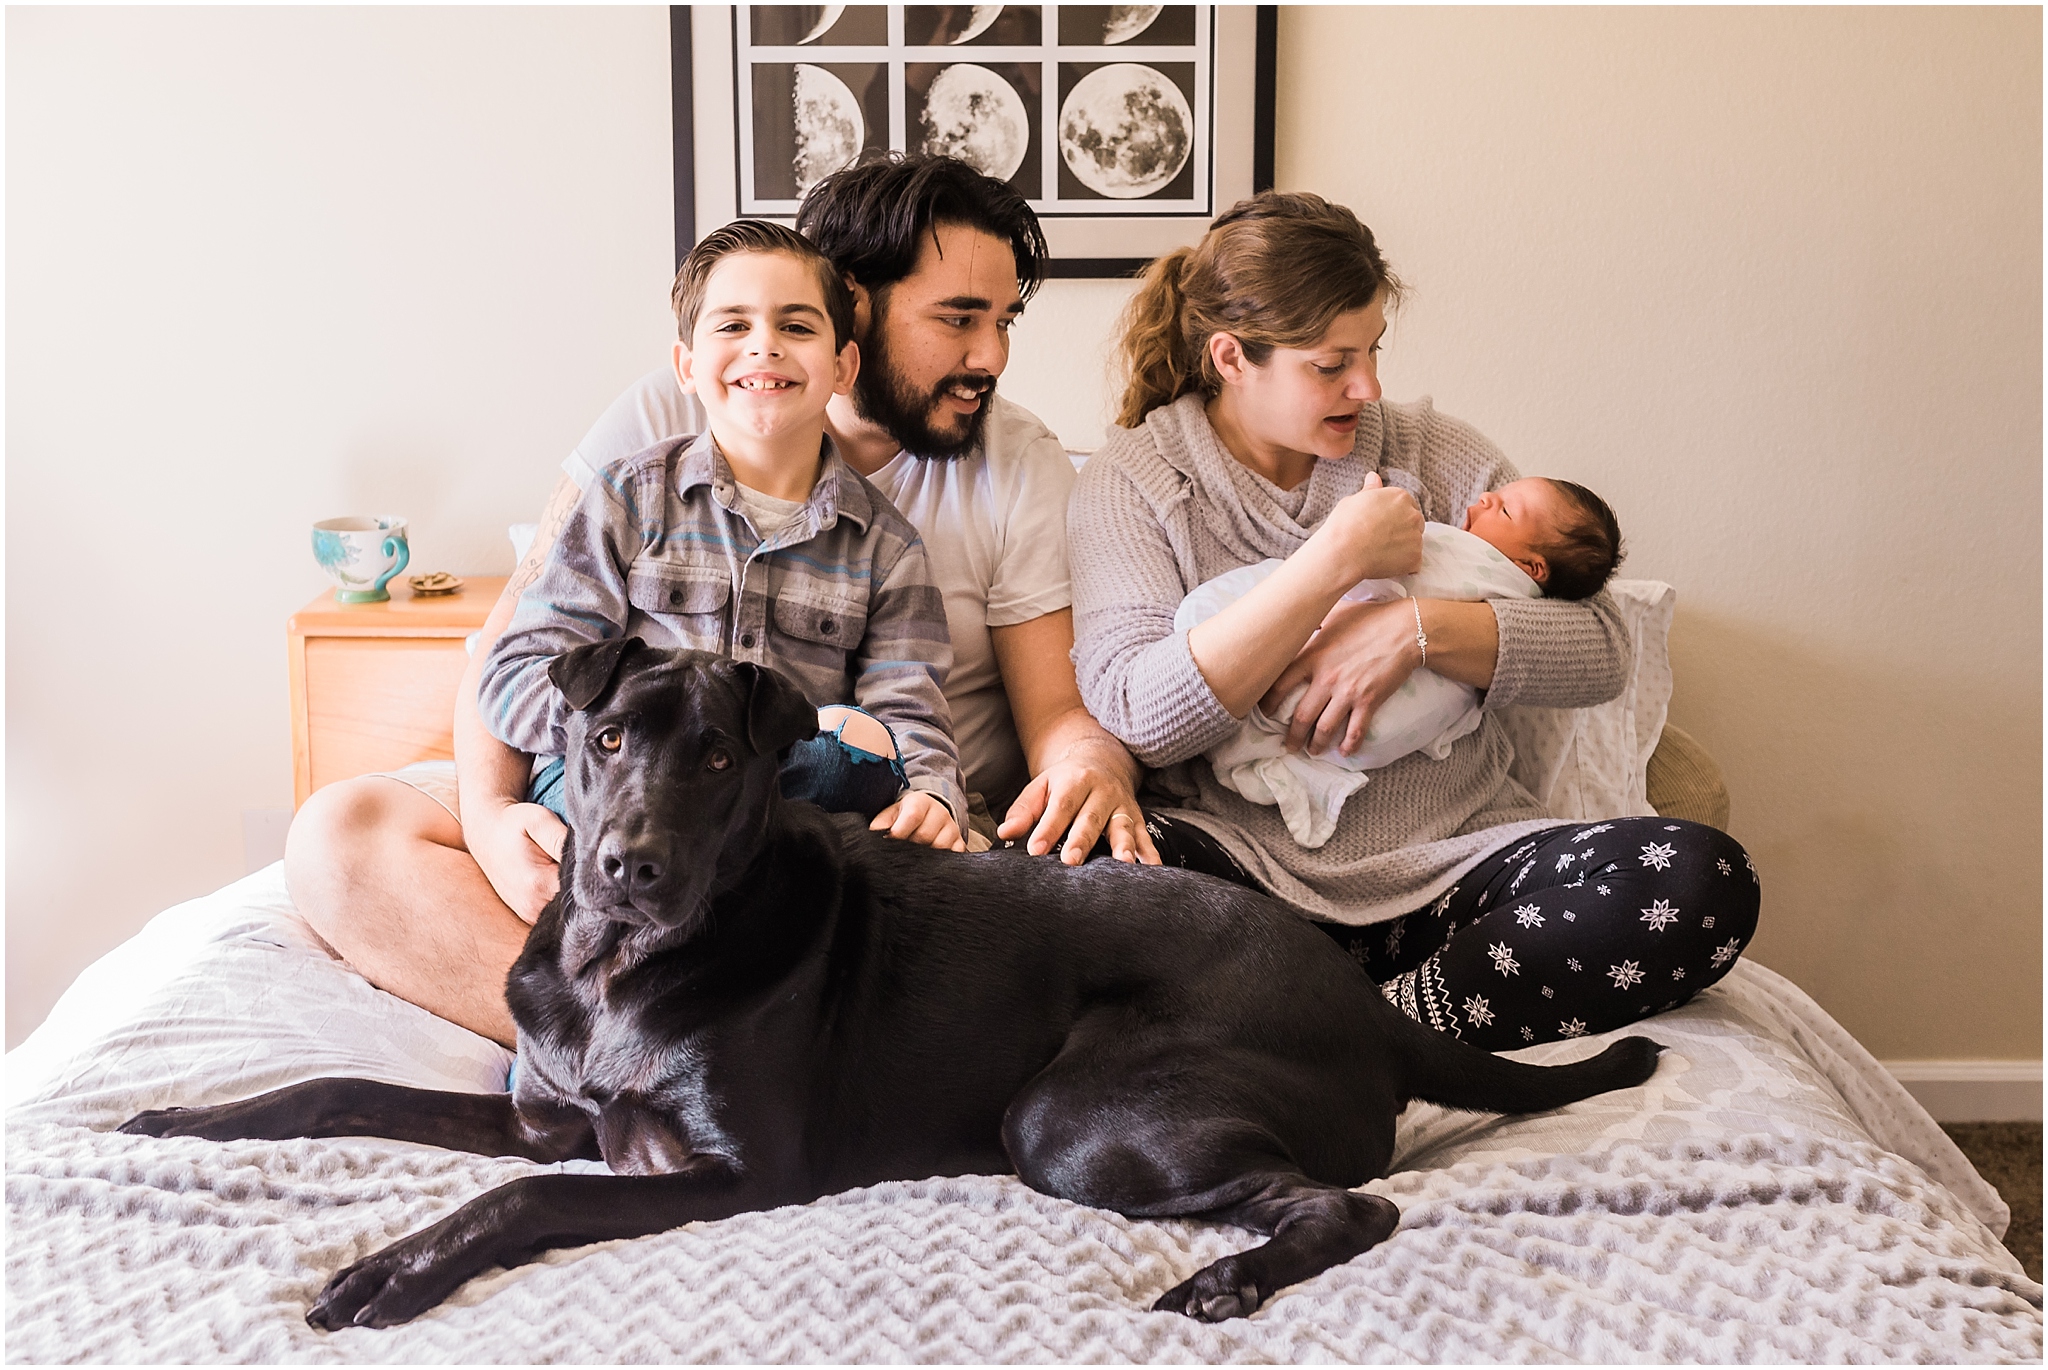 Family with newborn baby and dog on bed